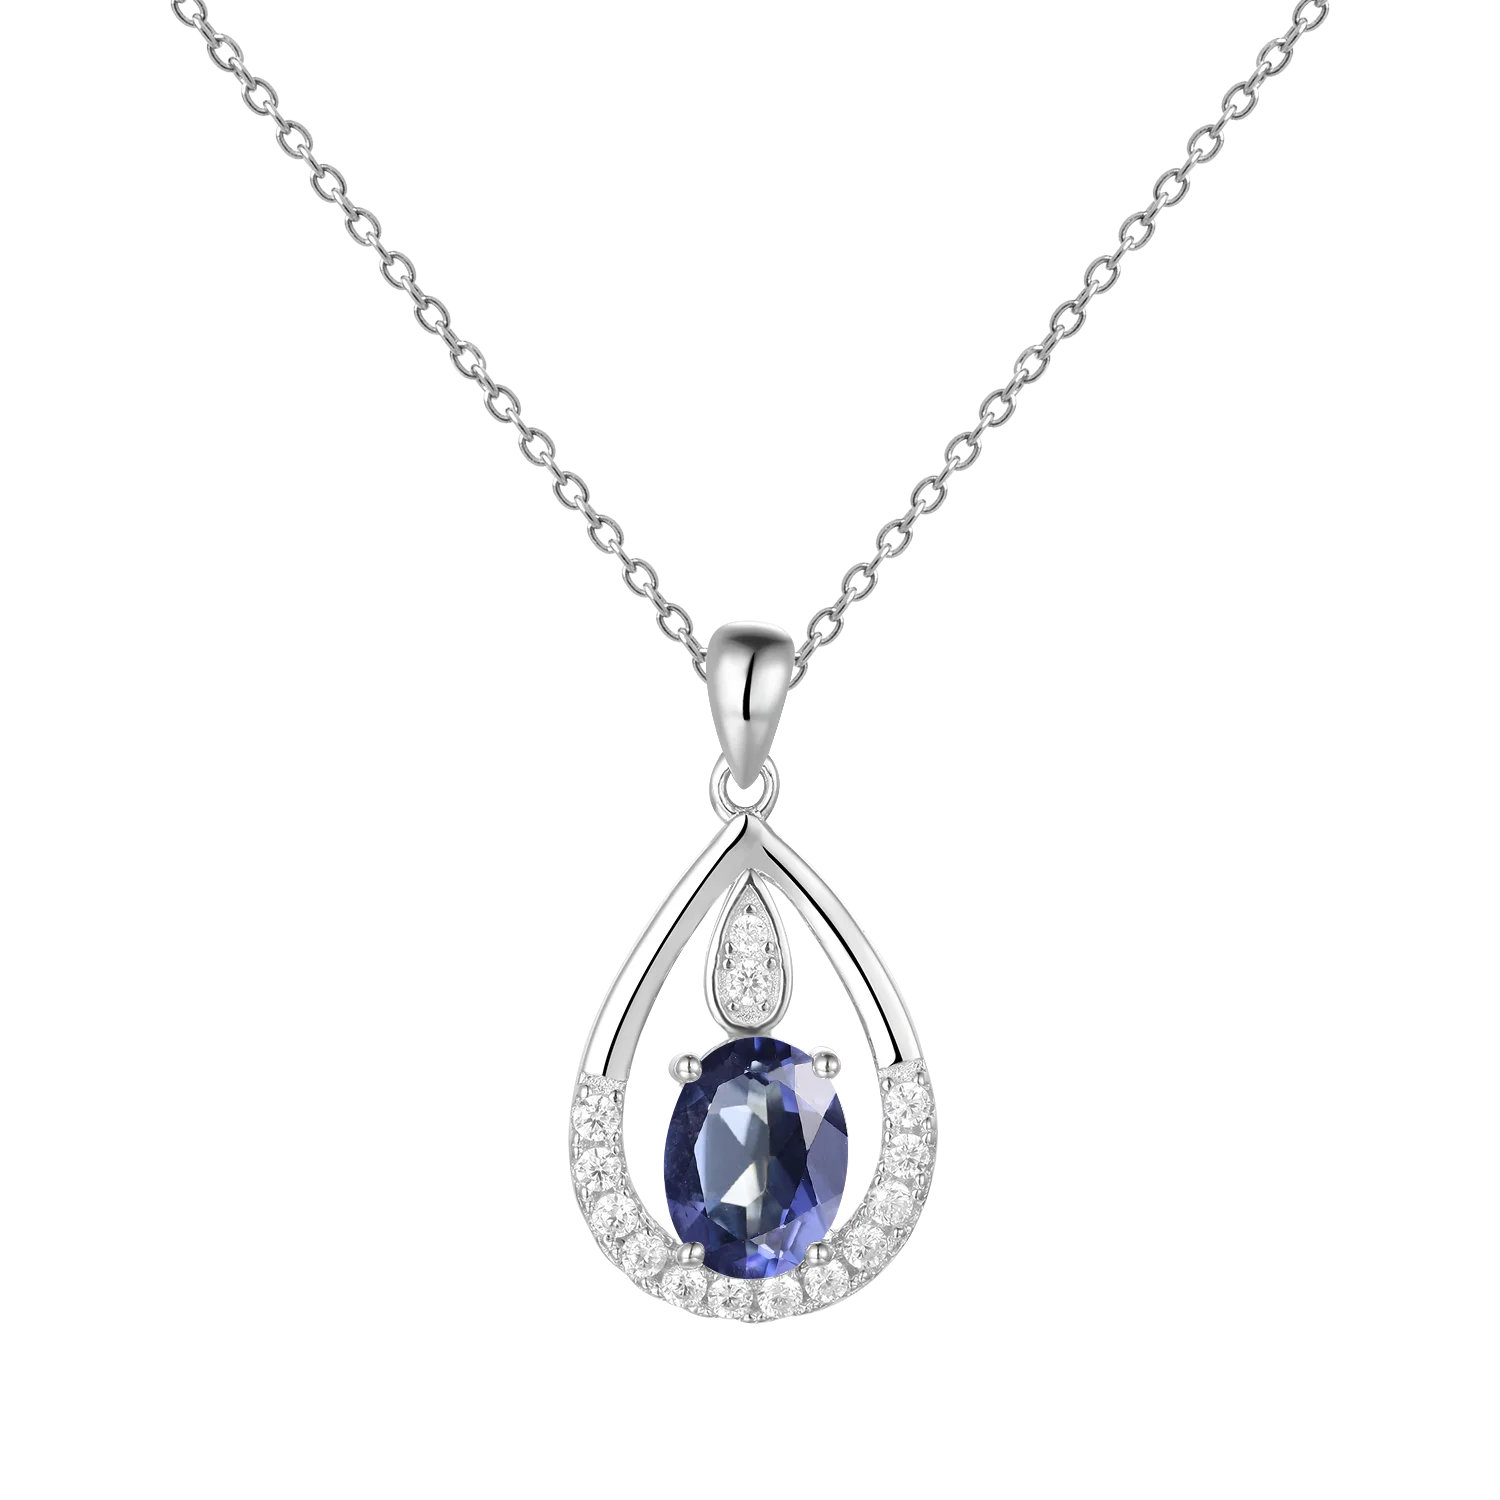 Gem's Ballet December Birthstone Topaz Necklace 6x8mm Oval Pink Topaz Pendant Necklace in 925 Sterling Silver with 18" Chain Iolite Blue